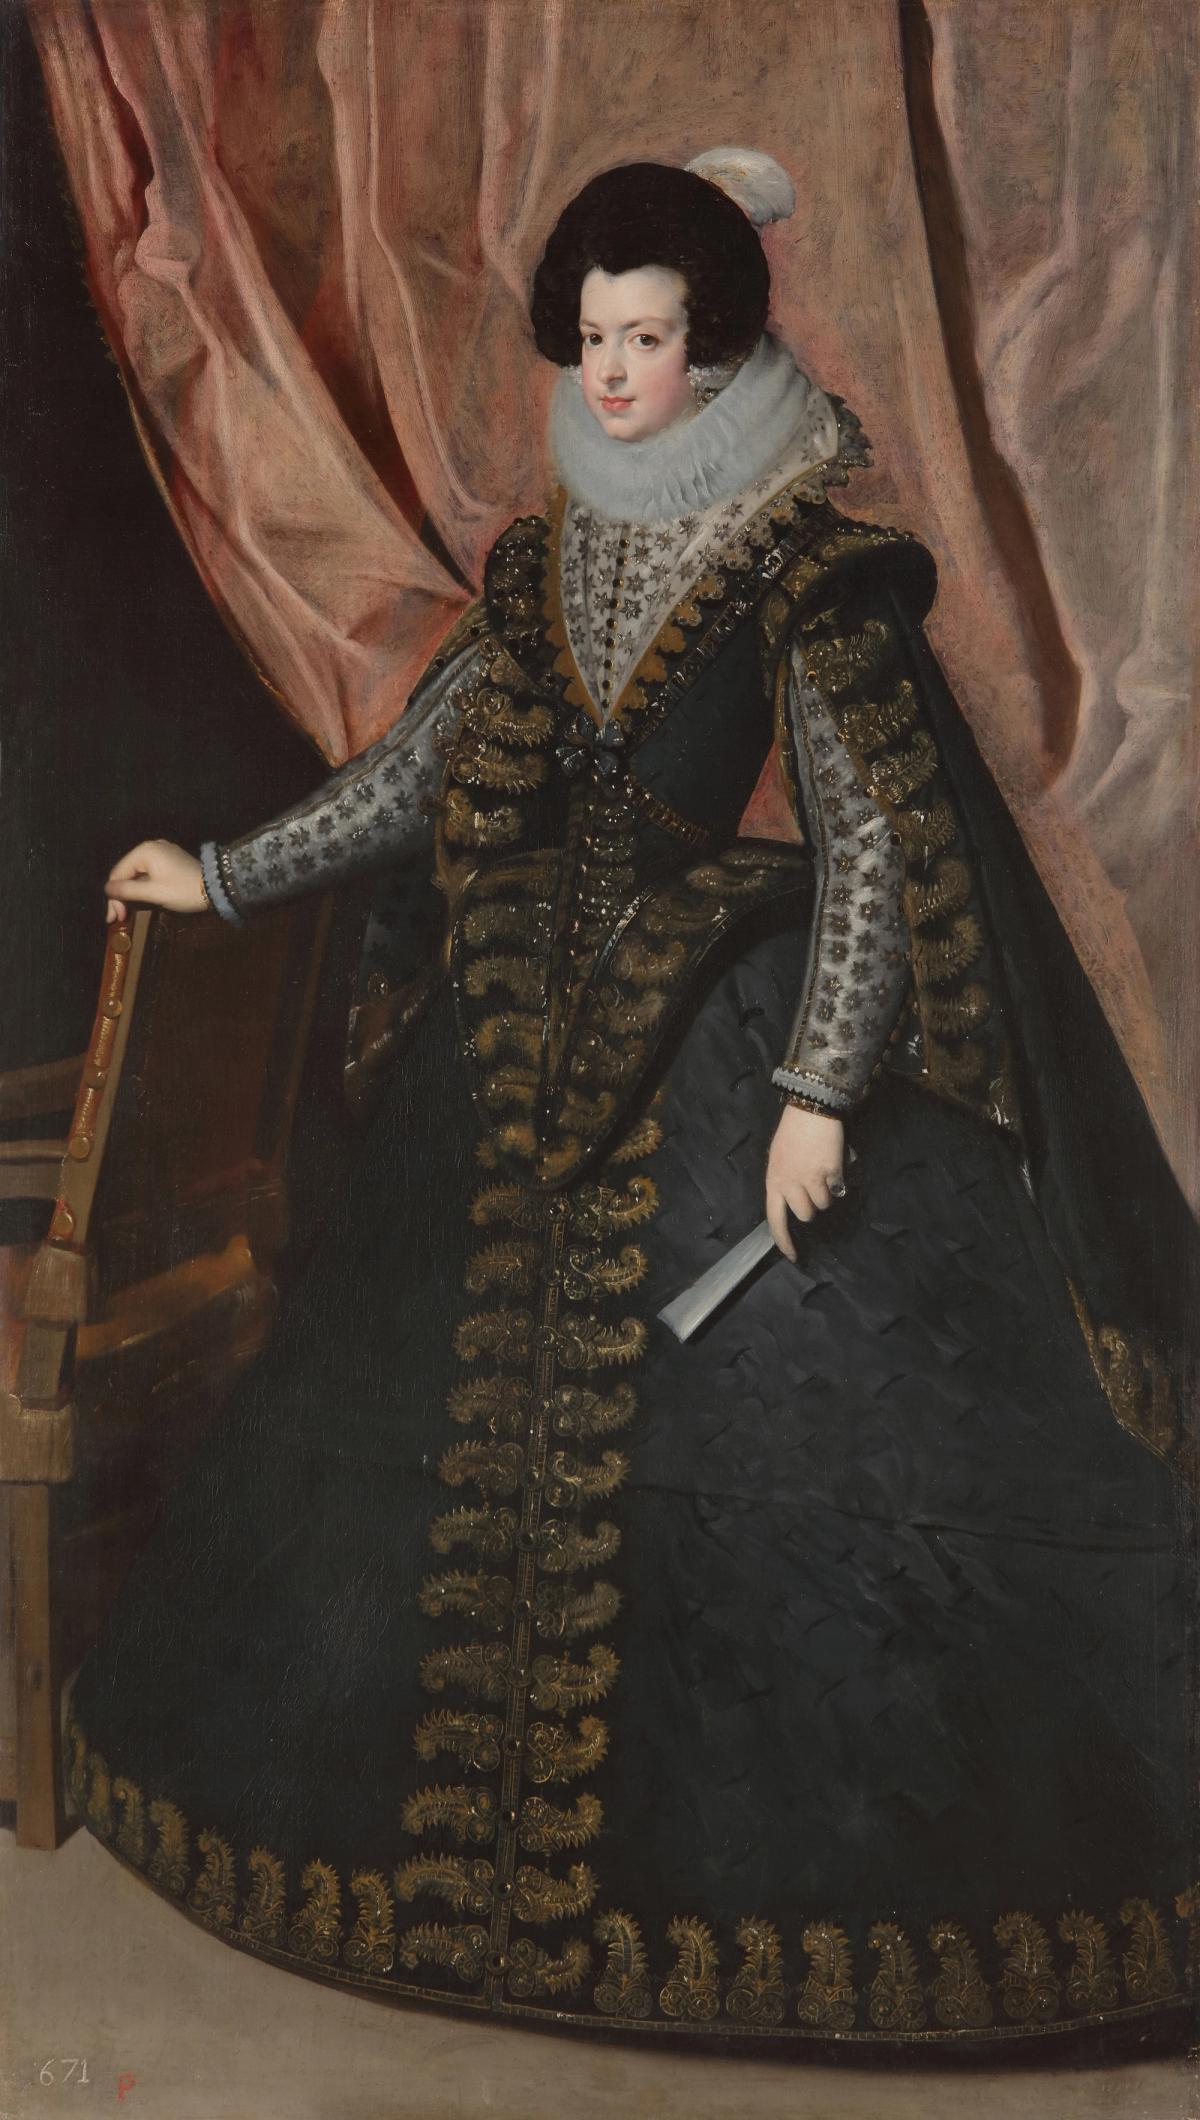 Isabel de Borbón, Queen of Spain (1632) by Diego Velázquez Courtesy Sotheby's